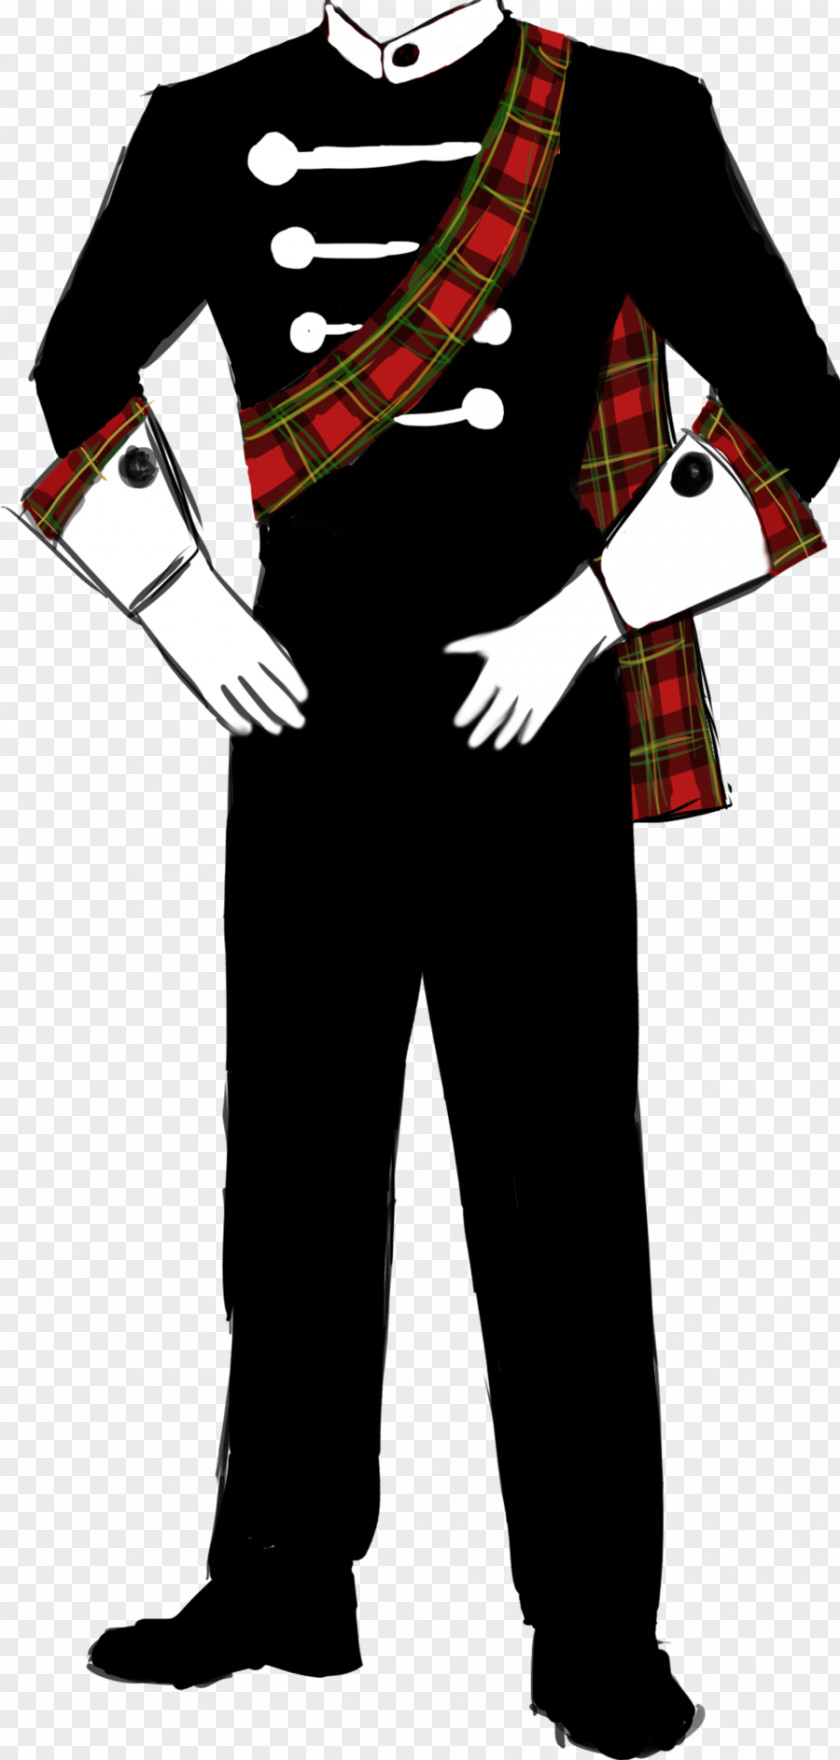 Uniform Marching Band Musical Ensemble Costume Drawing PNG